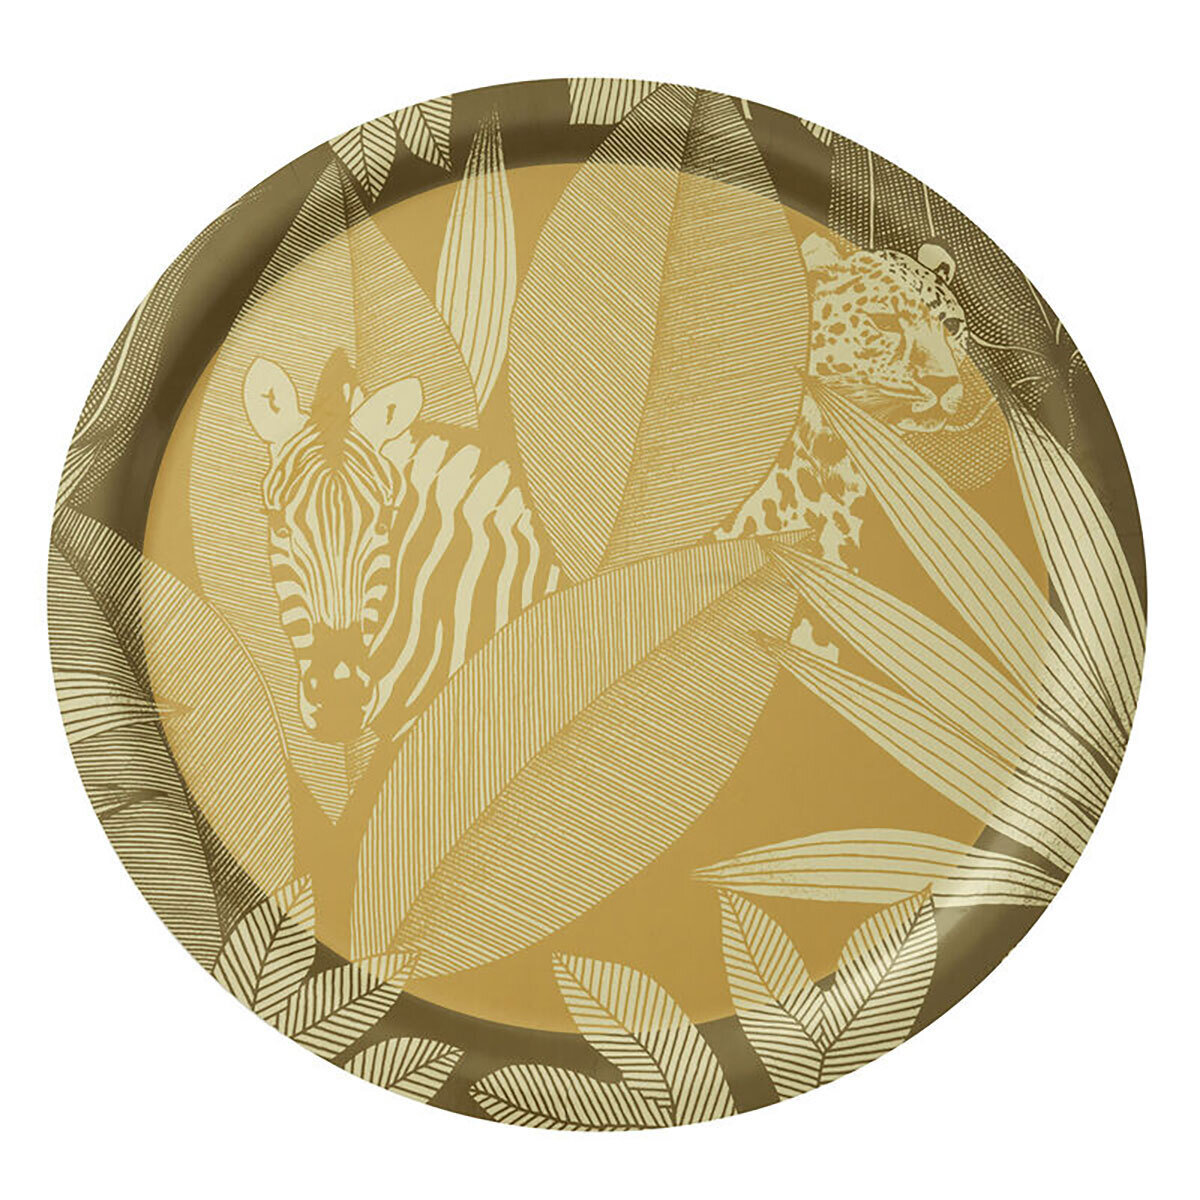 Le Jacquard Francais Nature Sauvage Yellow Tray 19 Inch 27535